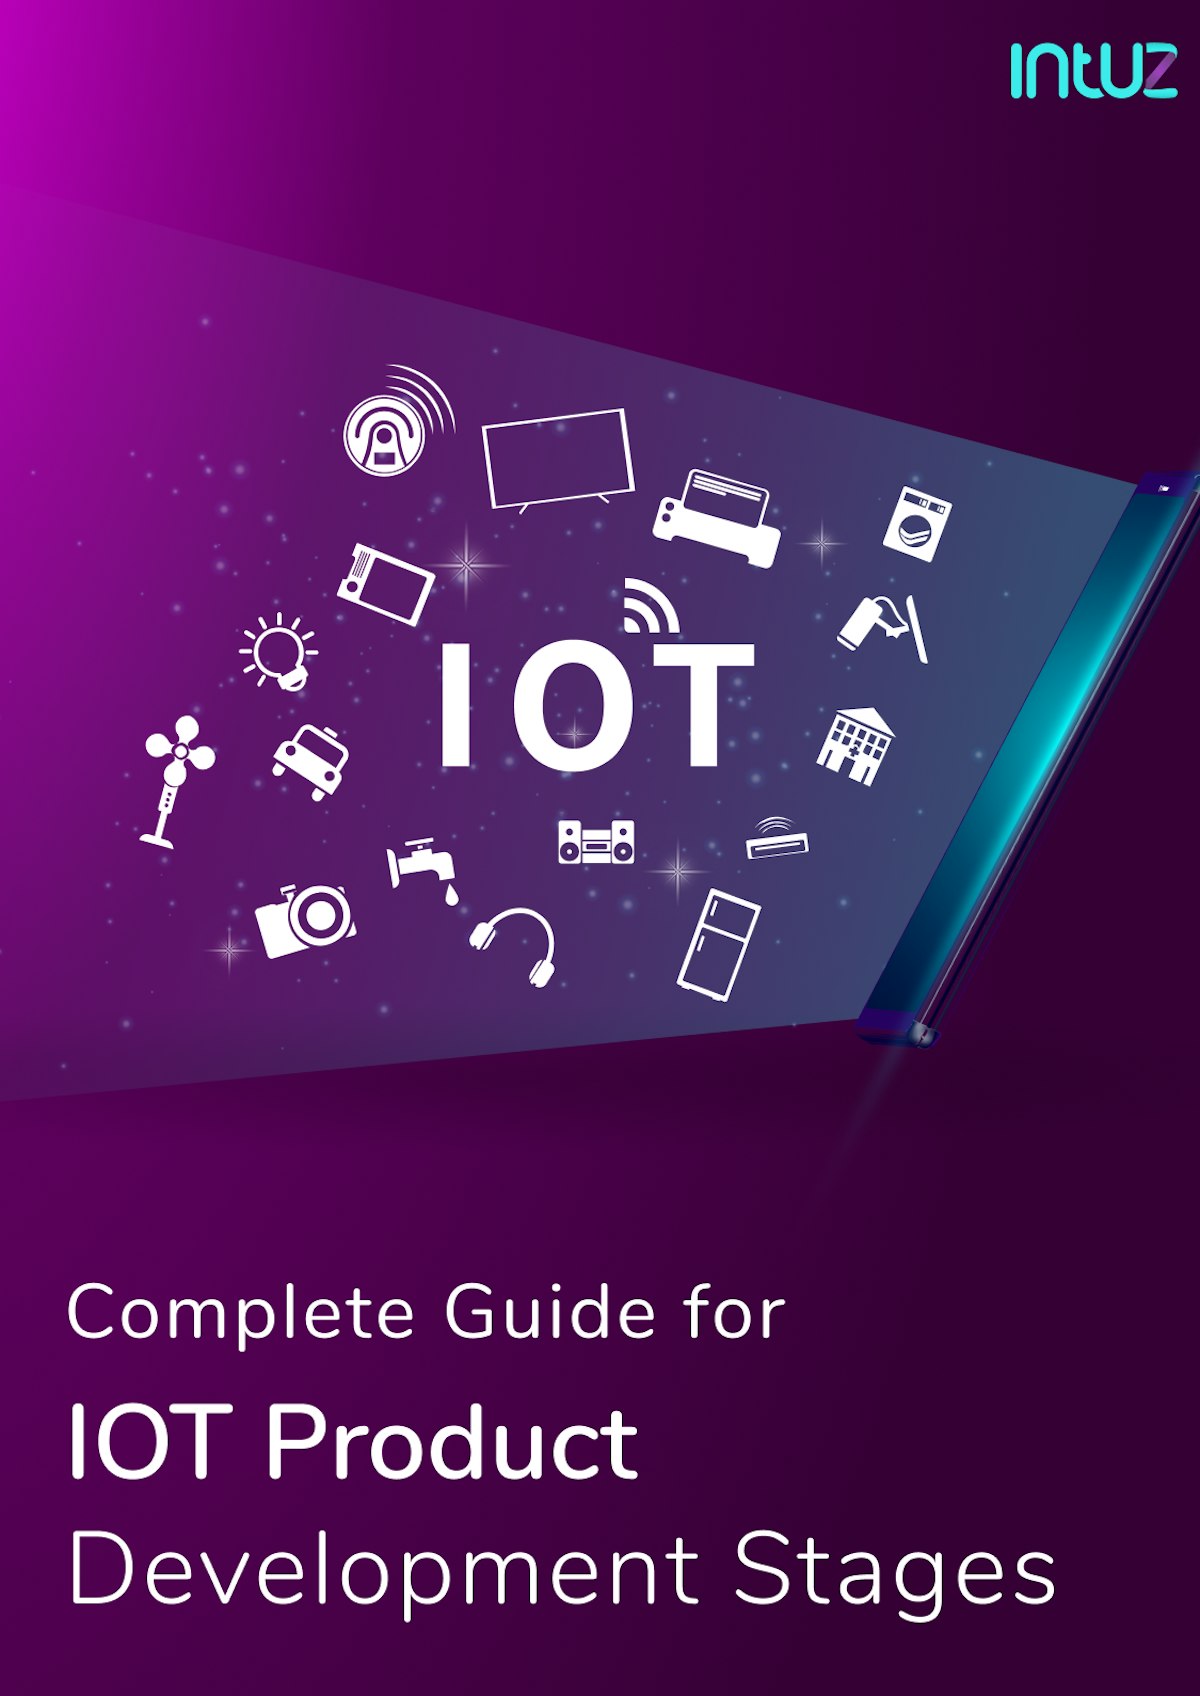 IoT Product Management - Guide